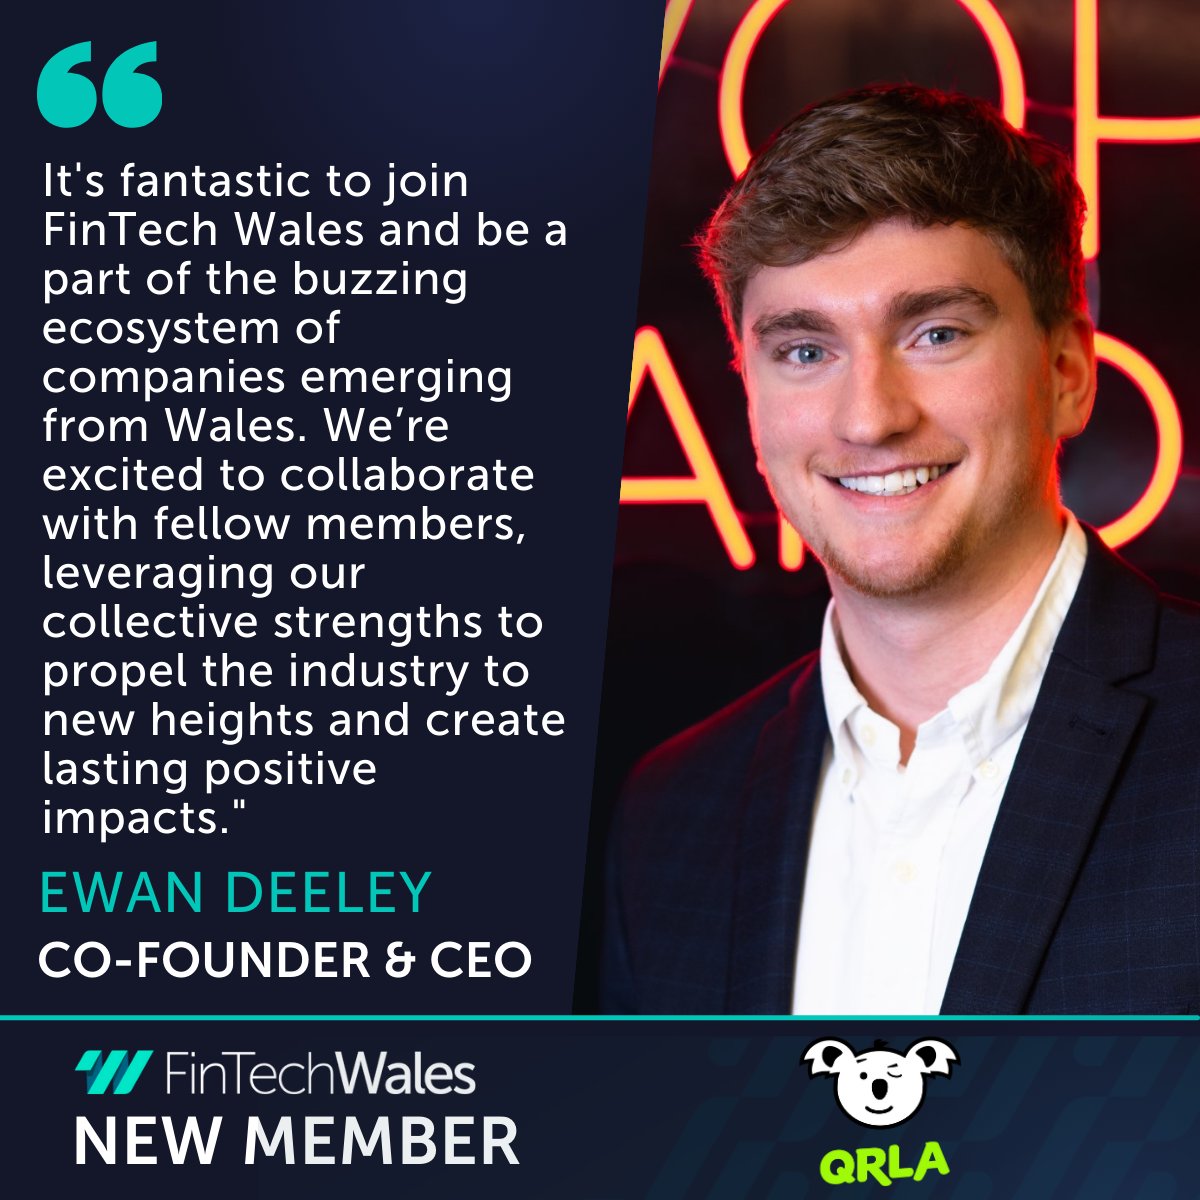 Welcome to FinTech Wales membership QLRA!🏴󠁧󠁢󠁷󠁬󠁳󠁿 With QR code scams on the rise, their proactive approach is timely. Their innovative app not only tackles fraud but also enhances user experience. Partnering with QRLA ensures businesses' QR codes are secure, maintaining customer trust.